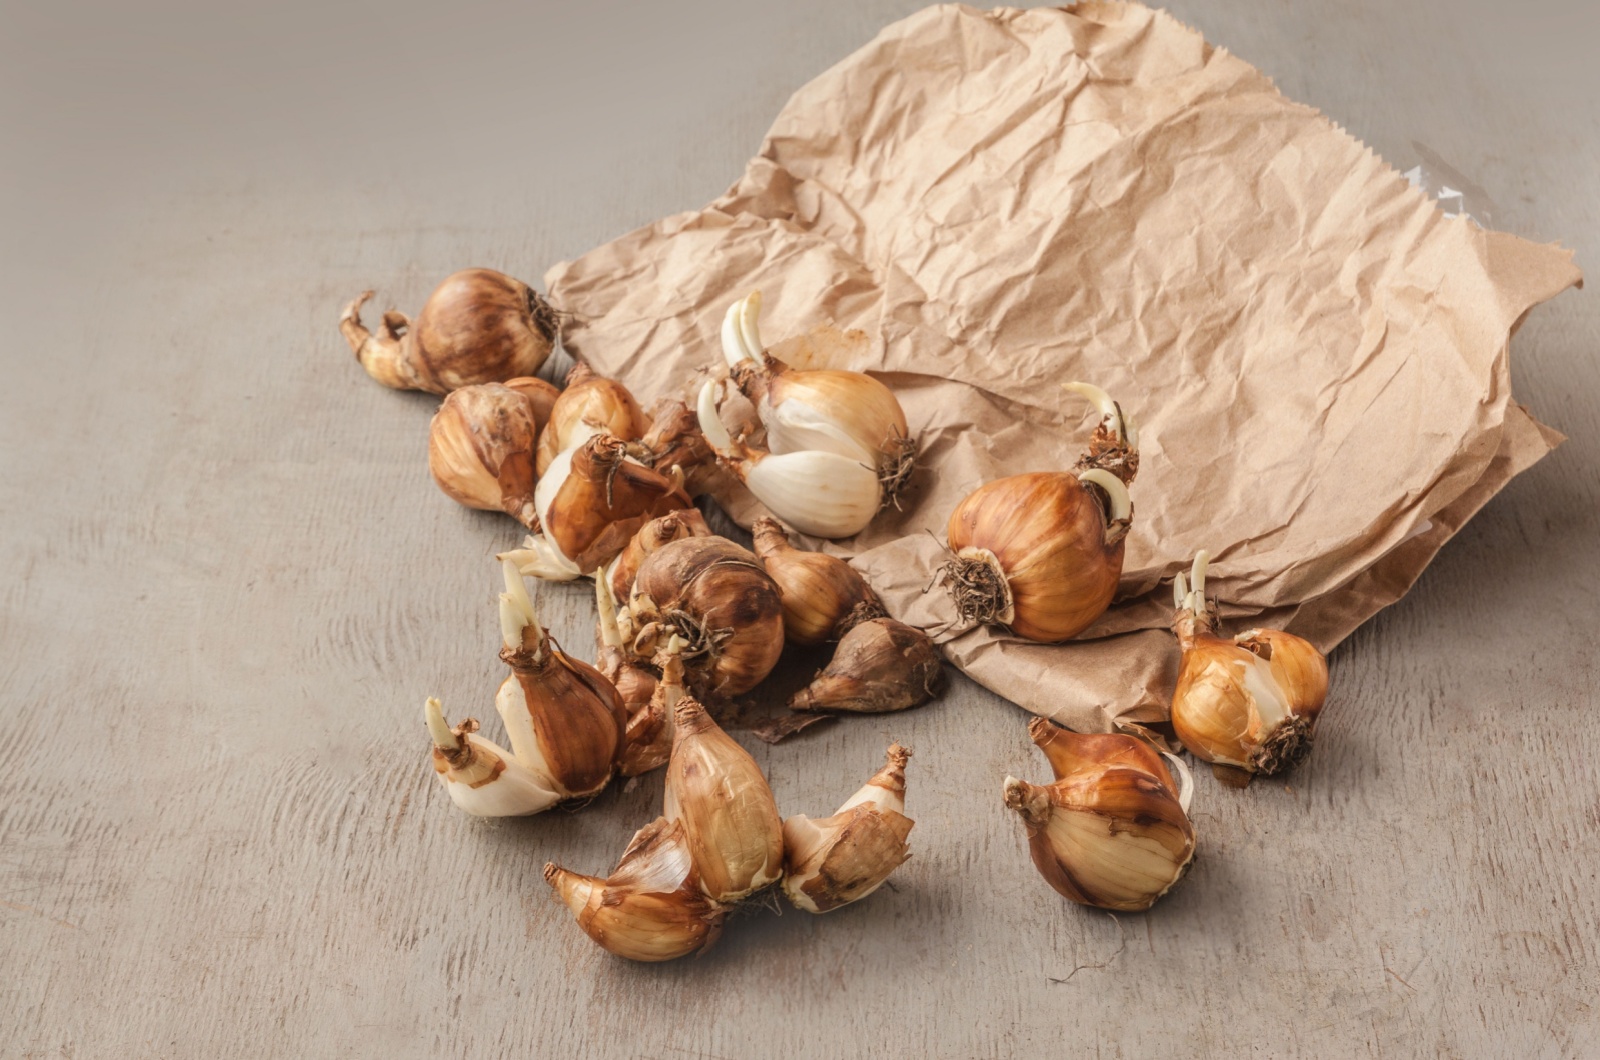 daffodil bulbs with leaf sprouts near a paper bag on a table